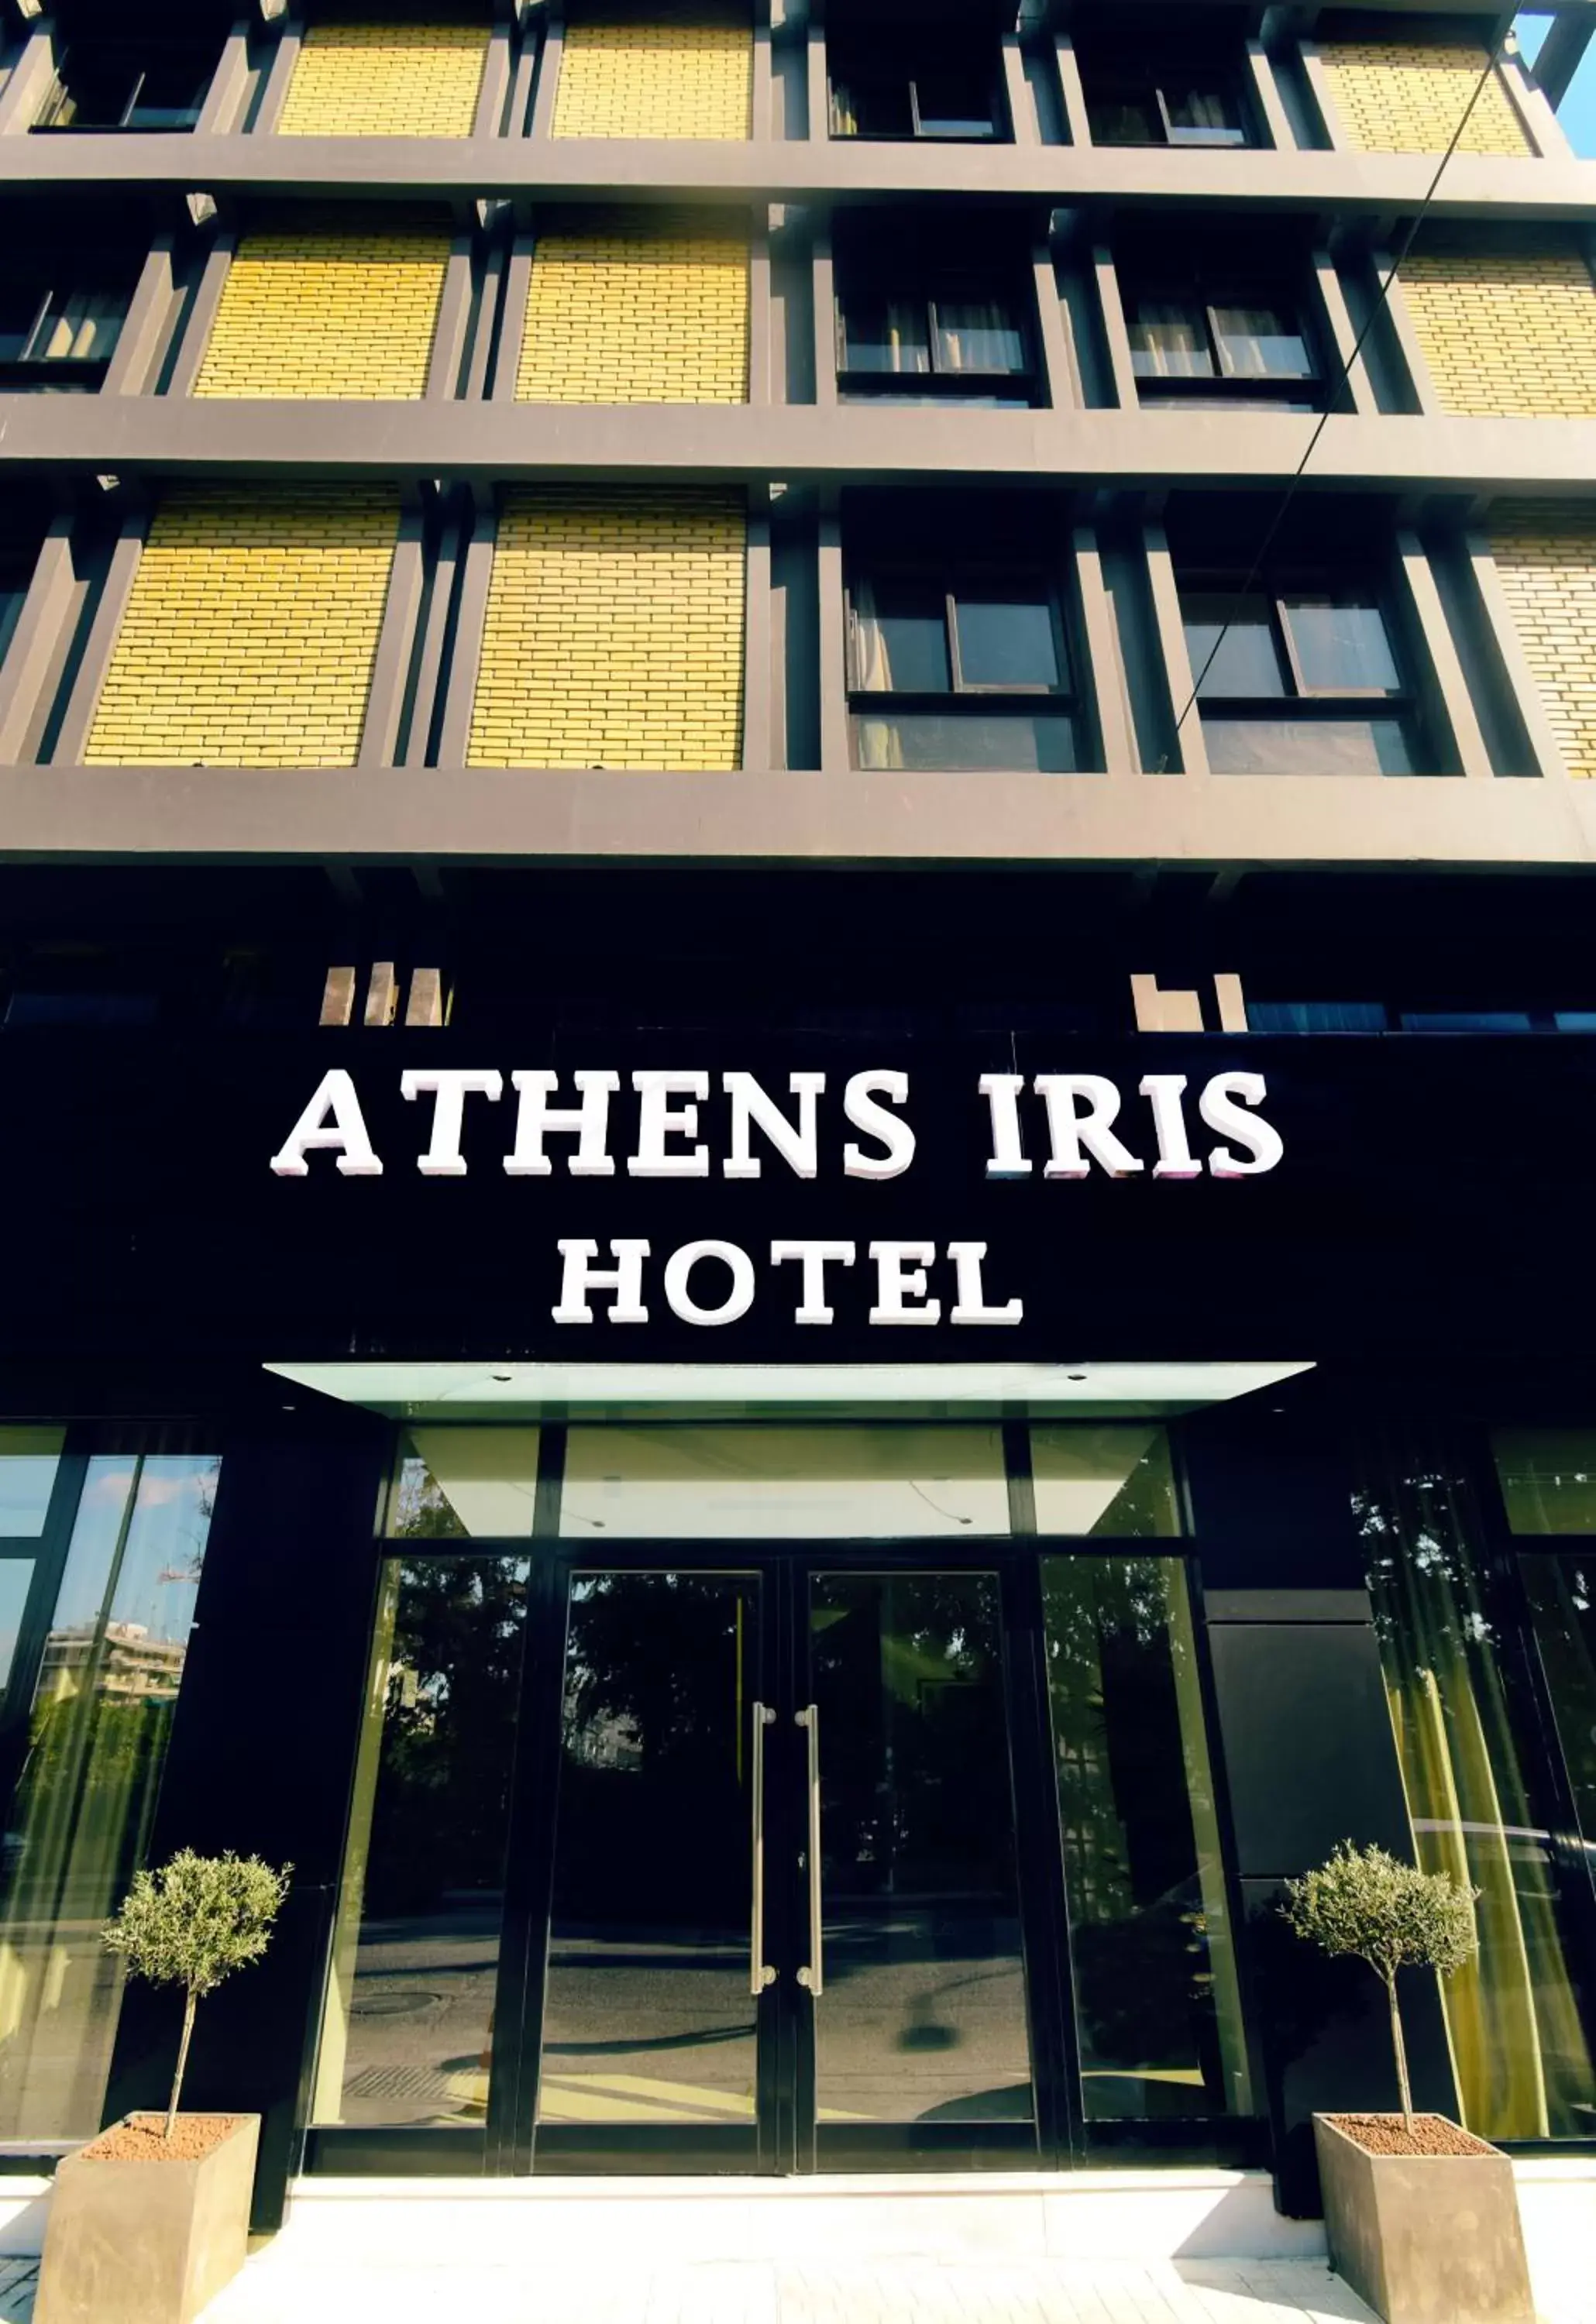 Property building in Athens Iris Hotel